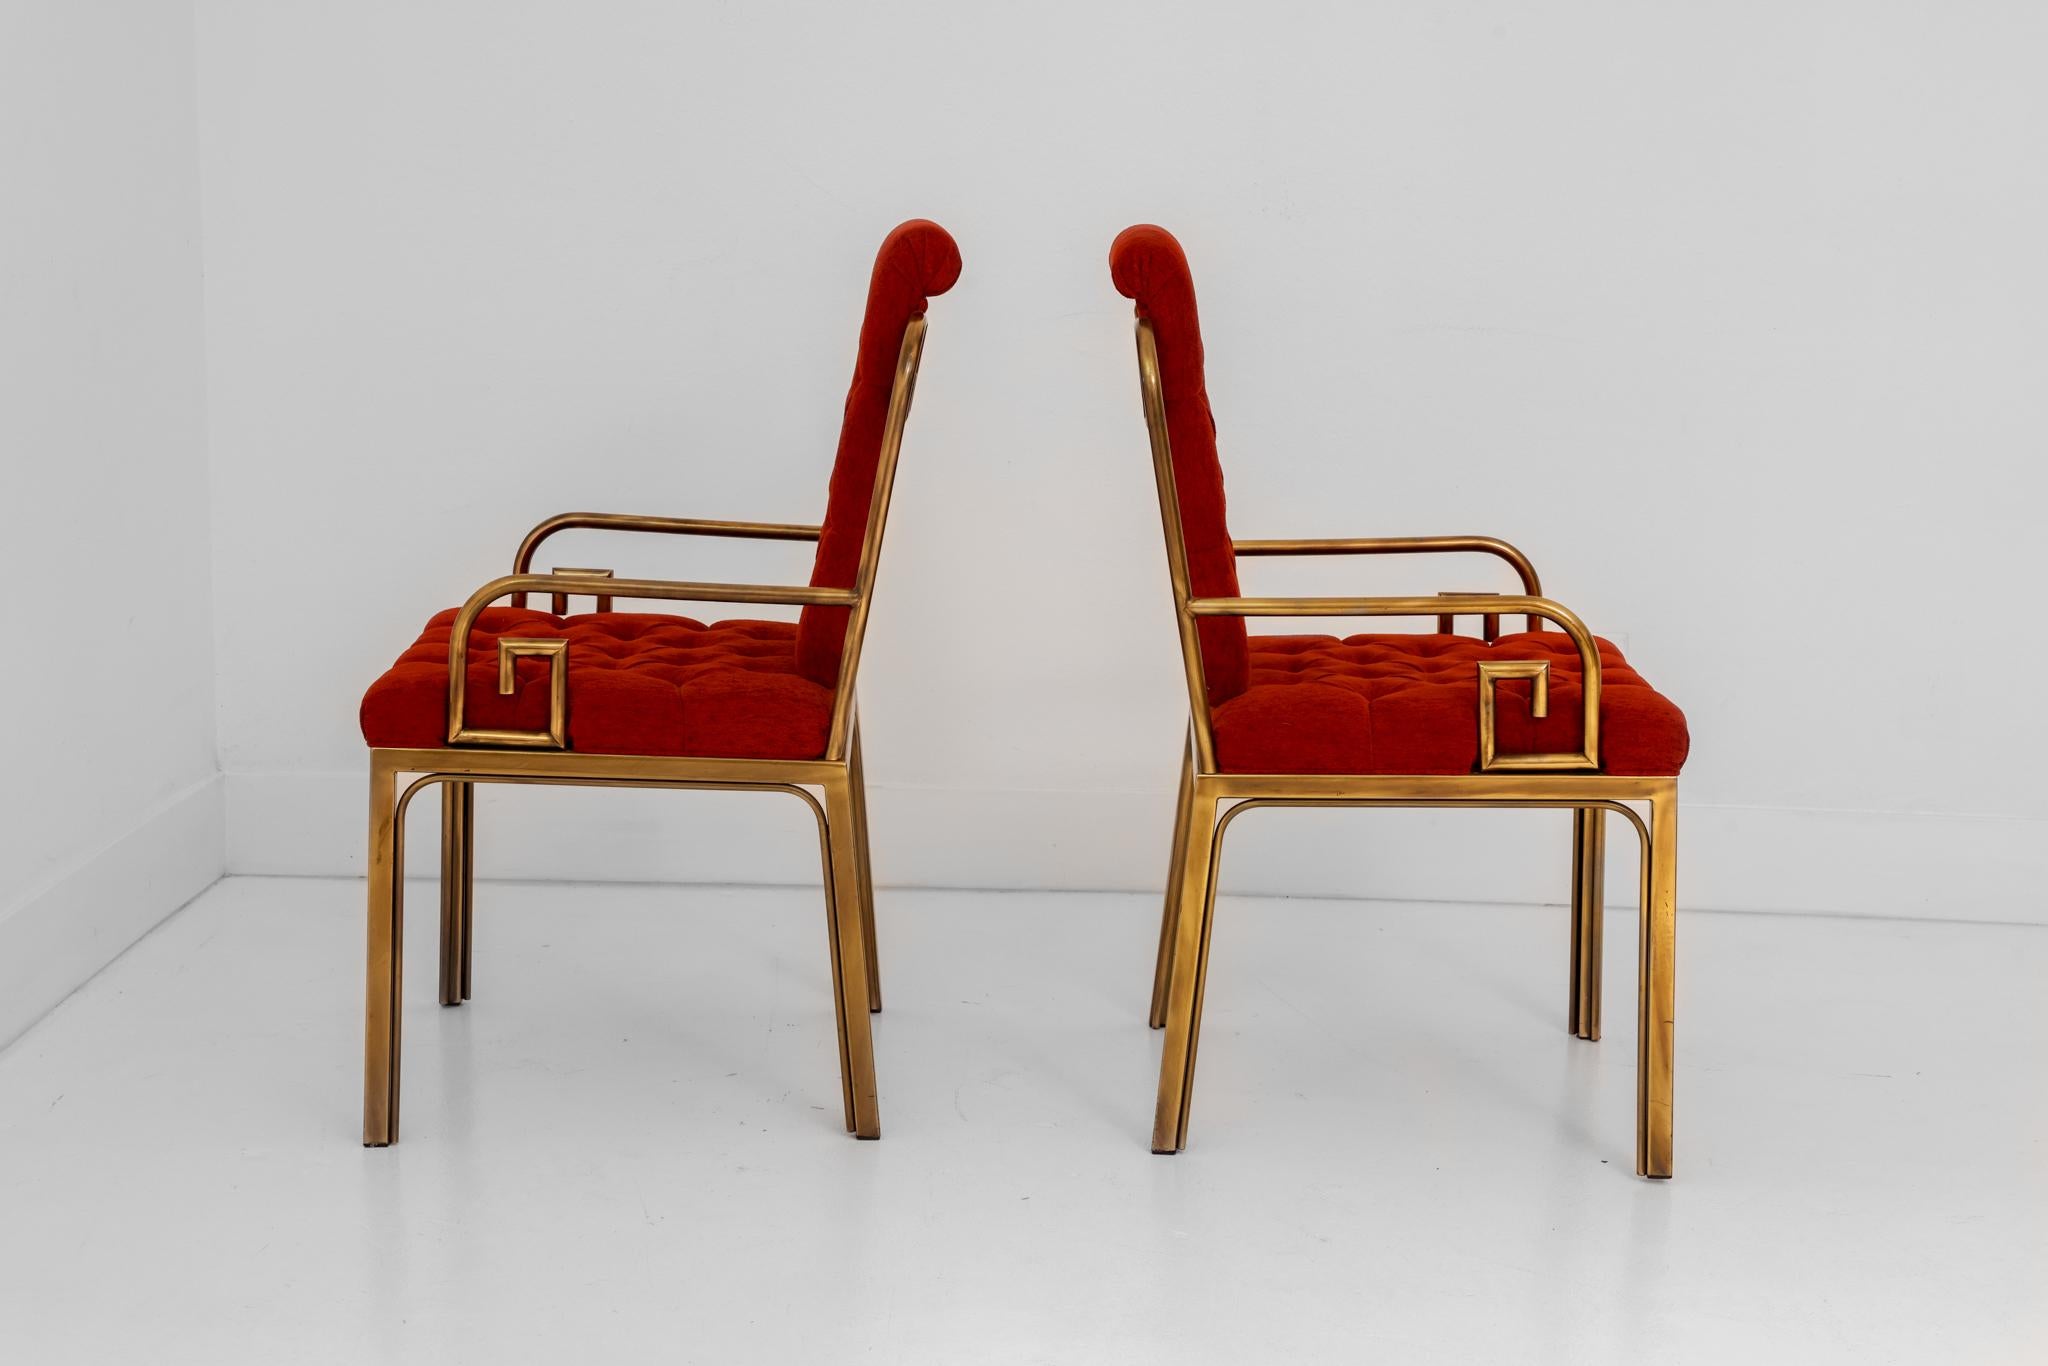 This is a gorgeous pair or original Mastercraft Greek Key arm dining chairs designed by Bernard Rohne. The original fabric is a deep burnt orange, both the seats and backs are tufted adding to the interest of these chairs. The original patina is a